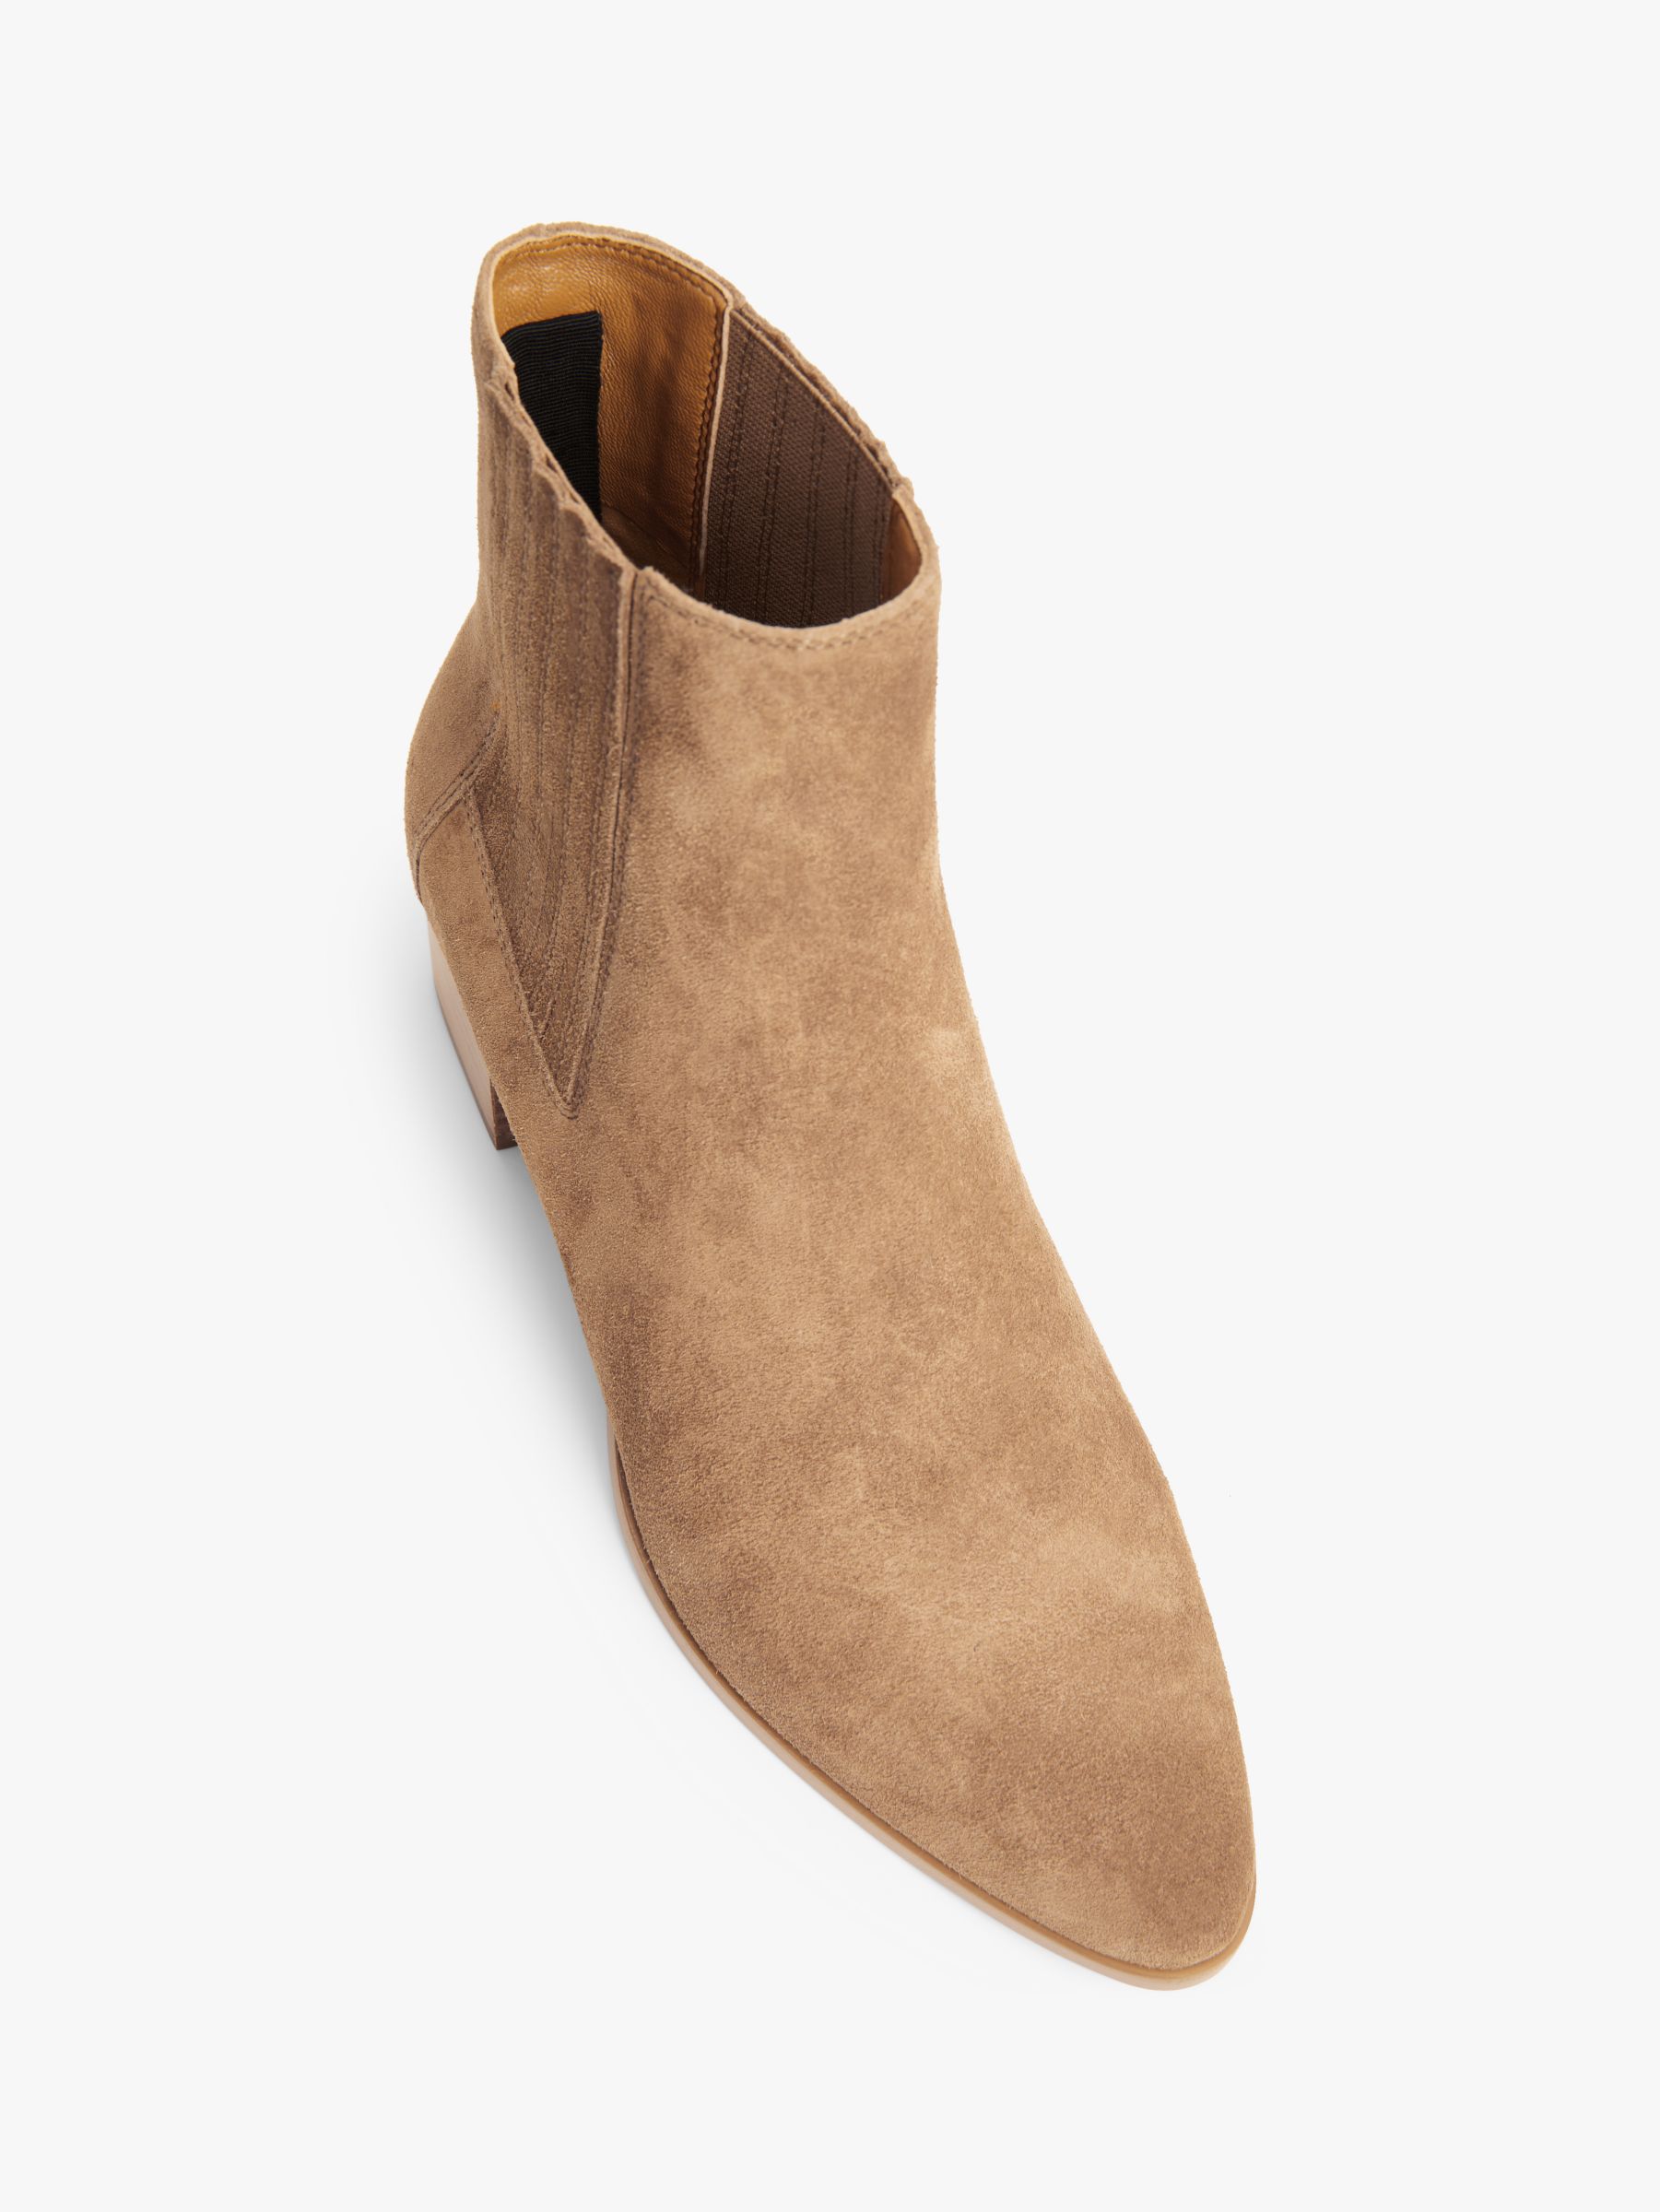 rag & bone Rover Suede Boots, Camel at John Lewis Partners